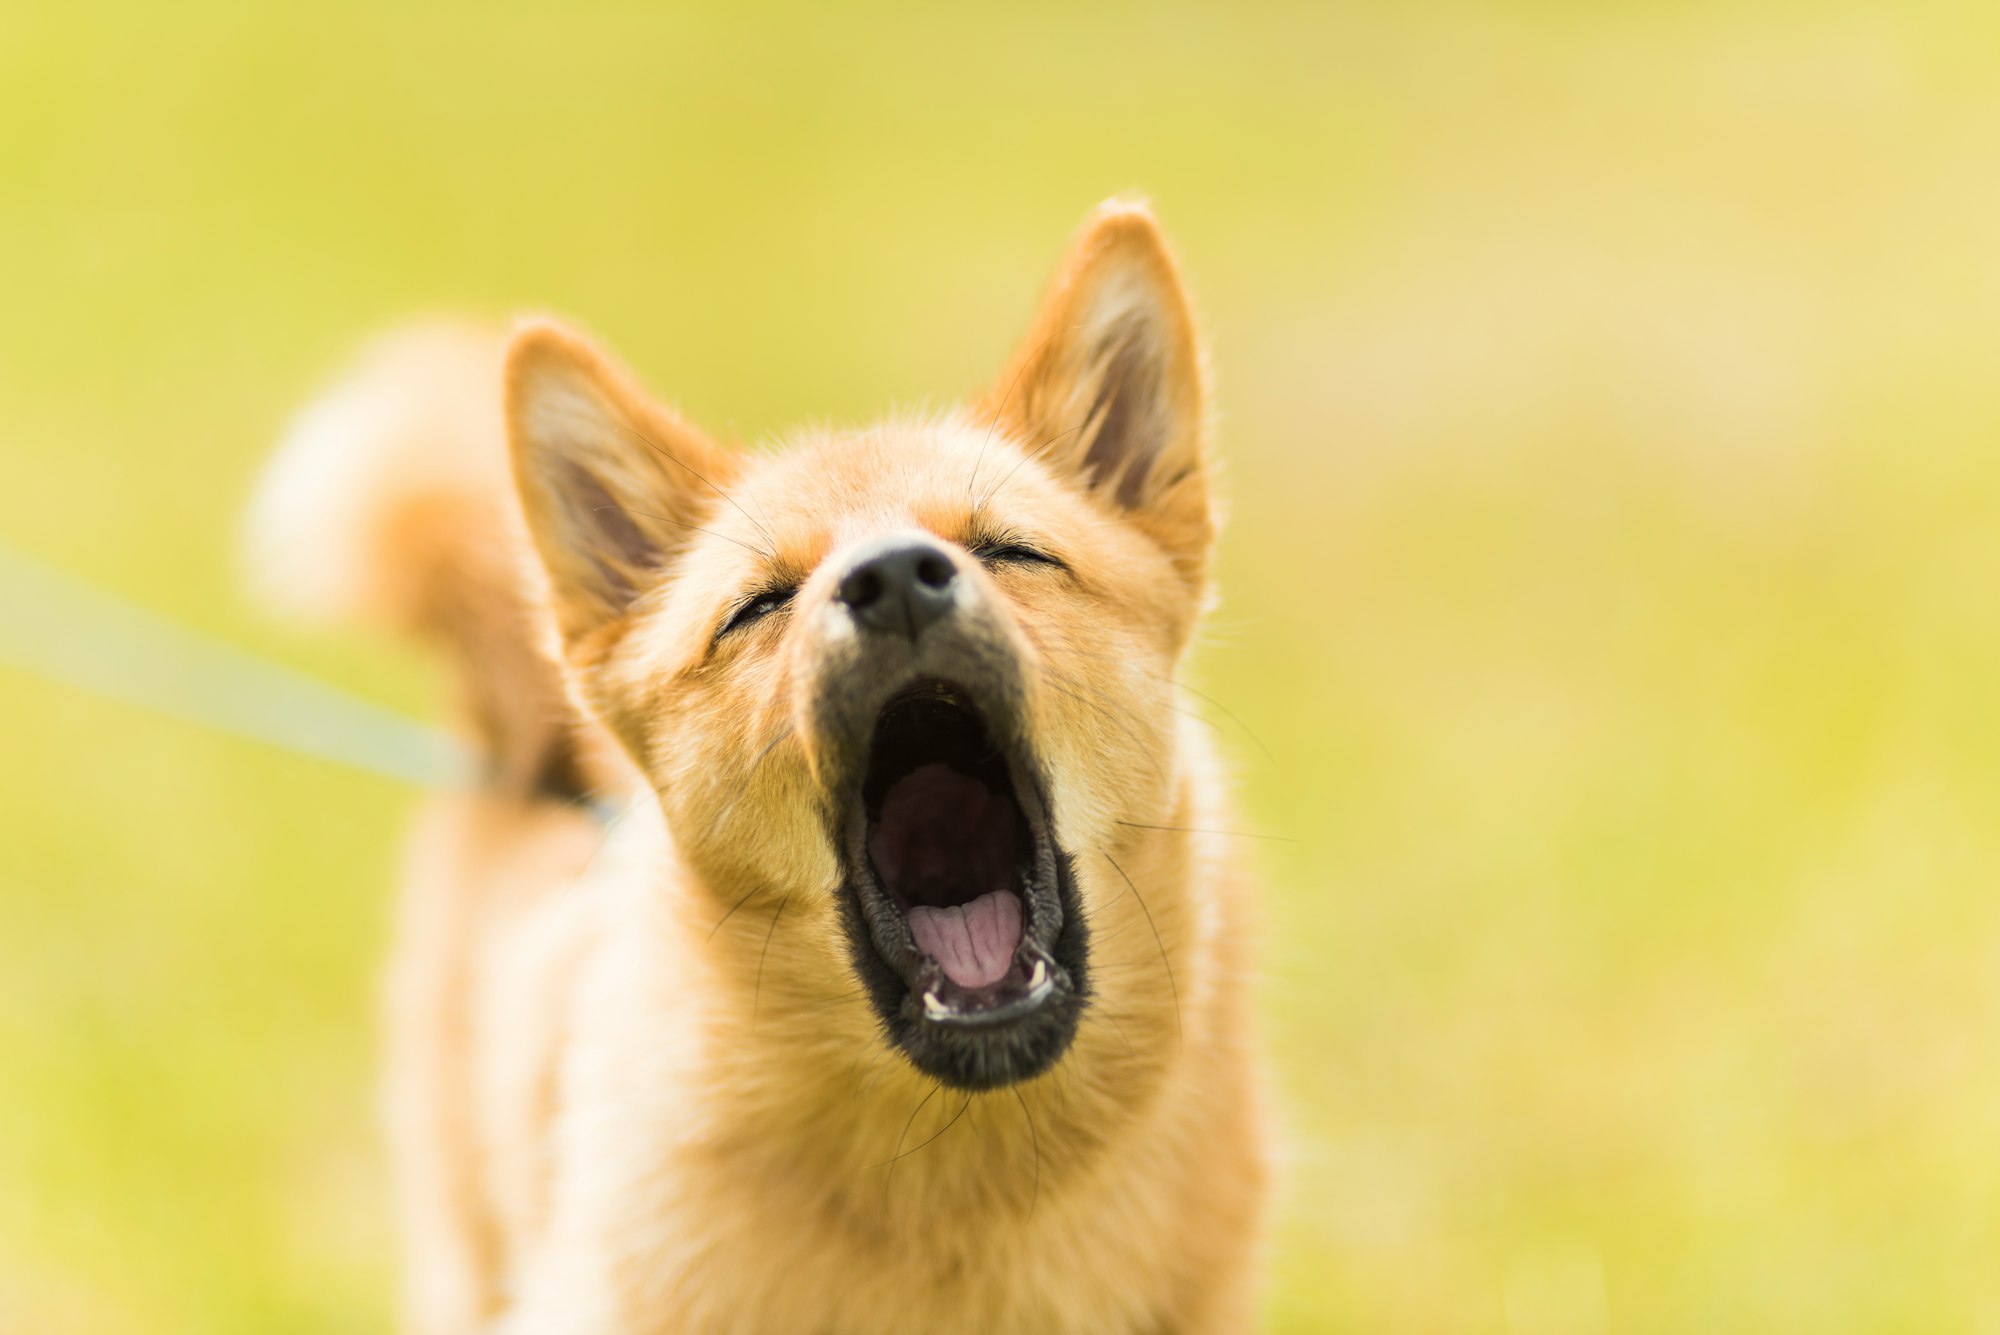 How can you train a dog to stop barking?